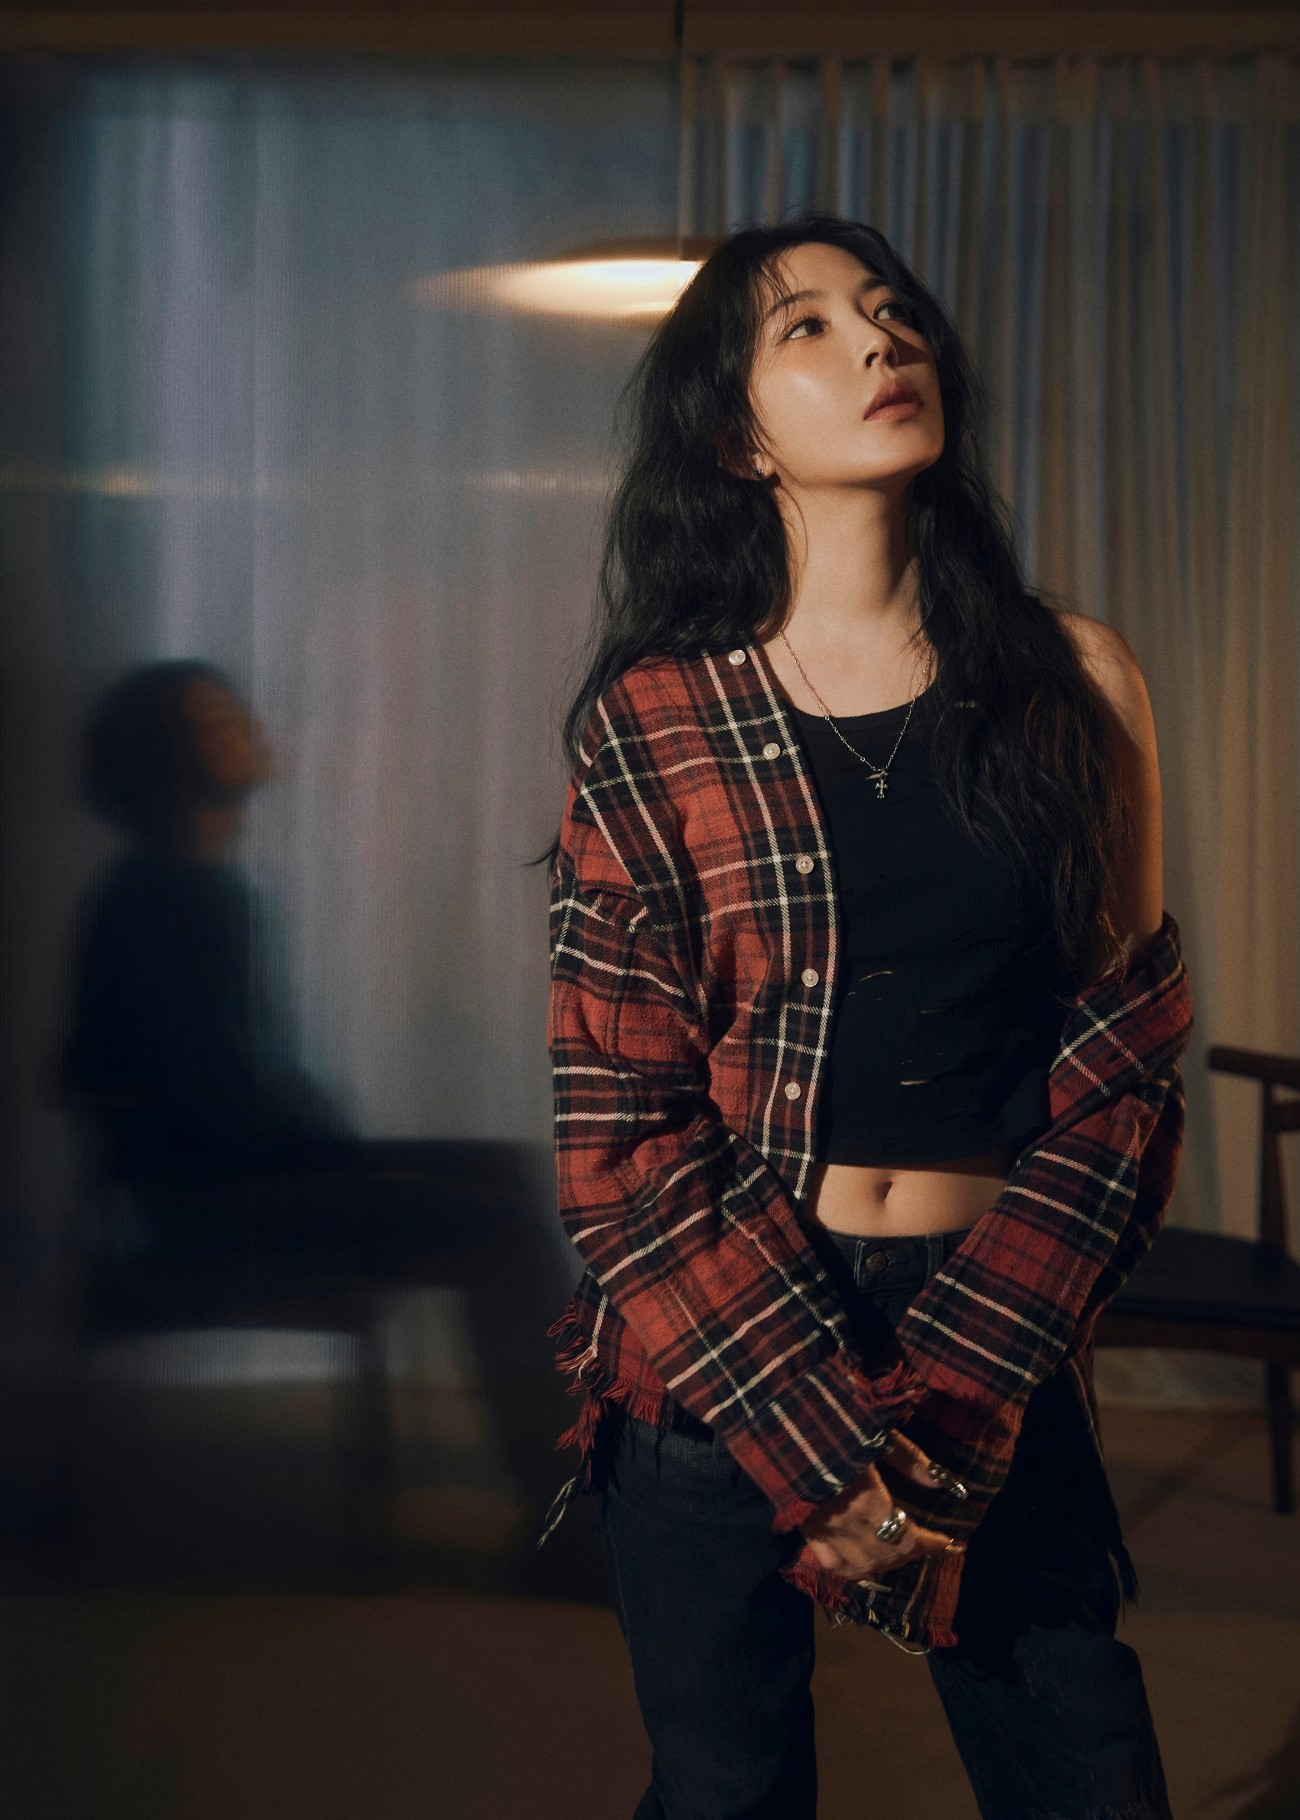 BoA is making a comeback as a singer with her self-composed song ‘Really, Gone?’.